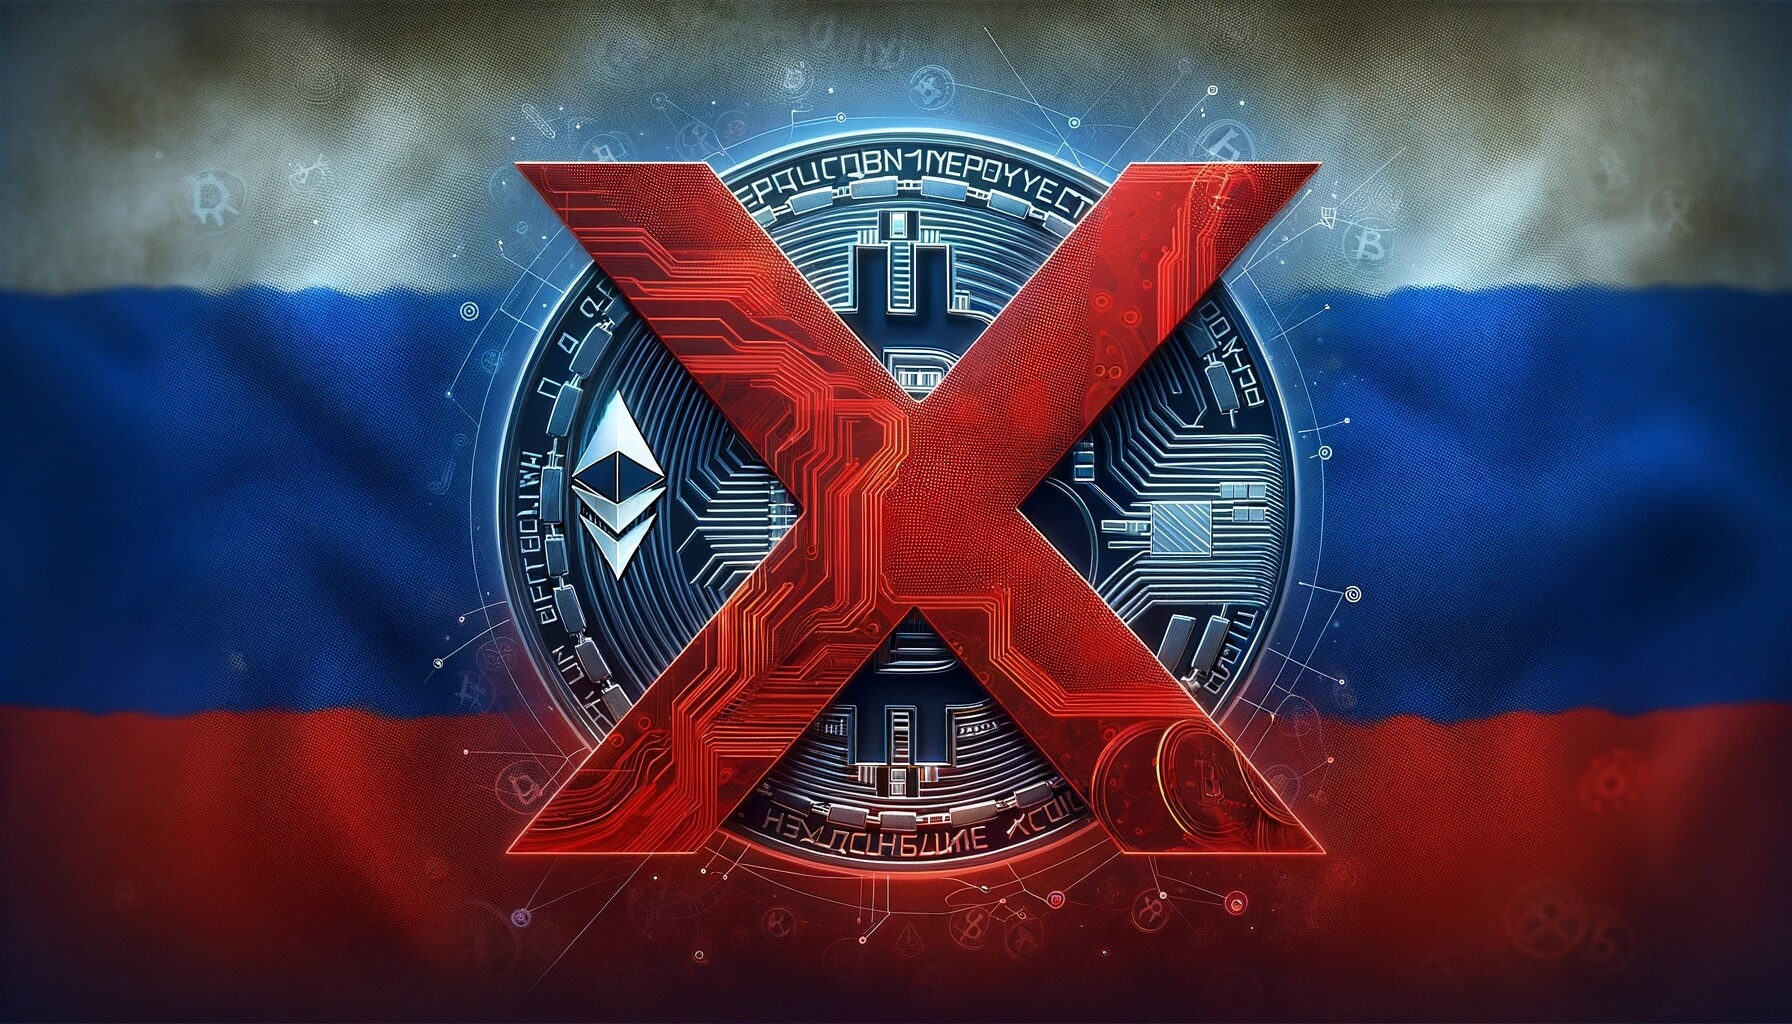 DALL%C2%B7E 2023 12 20 15.54.28 A large abstract red X symbol superimposed over a subtly depicted Russian flag with cryptocurrency symbols like Bitcoin and Ethereum artistically